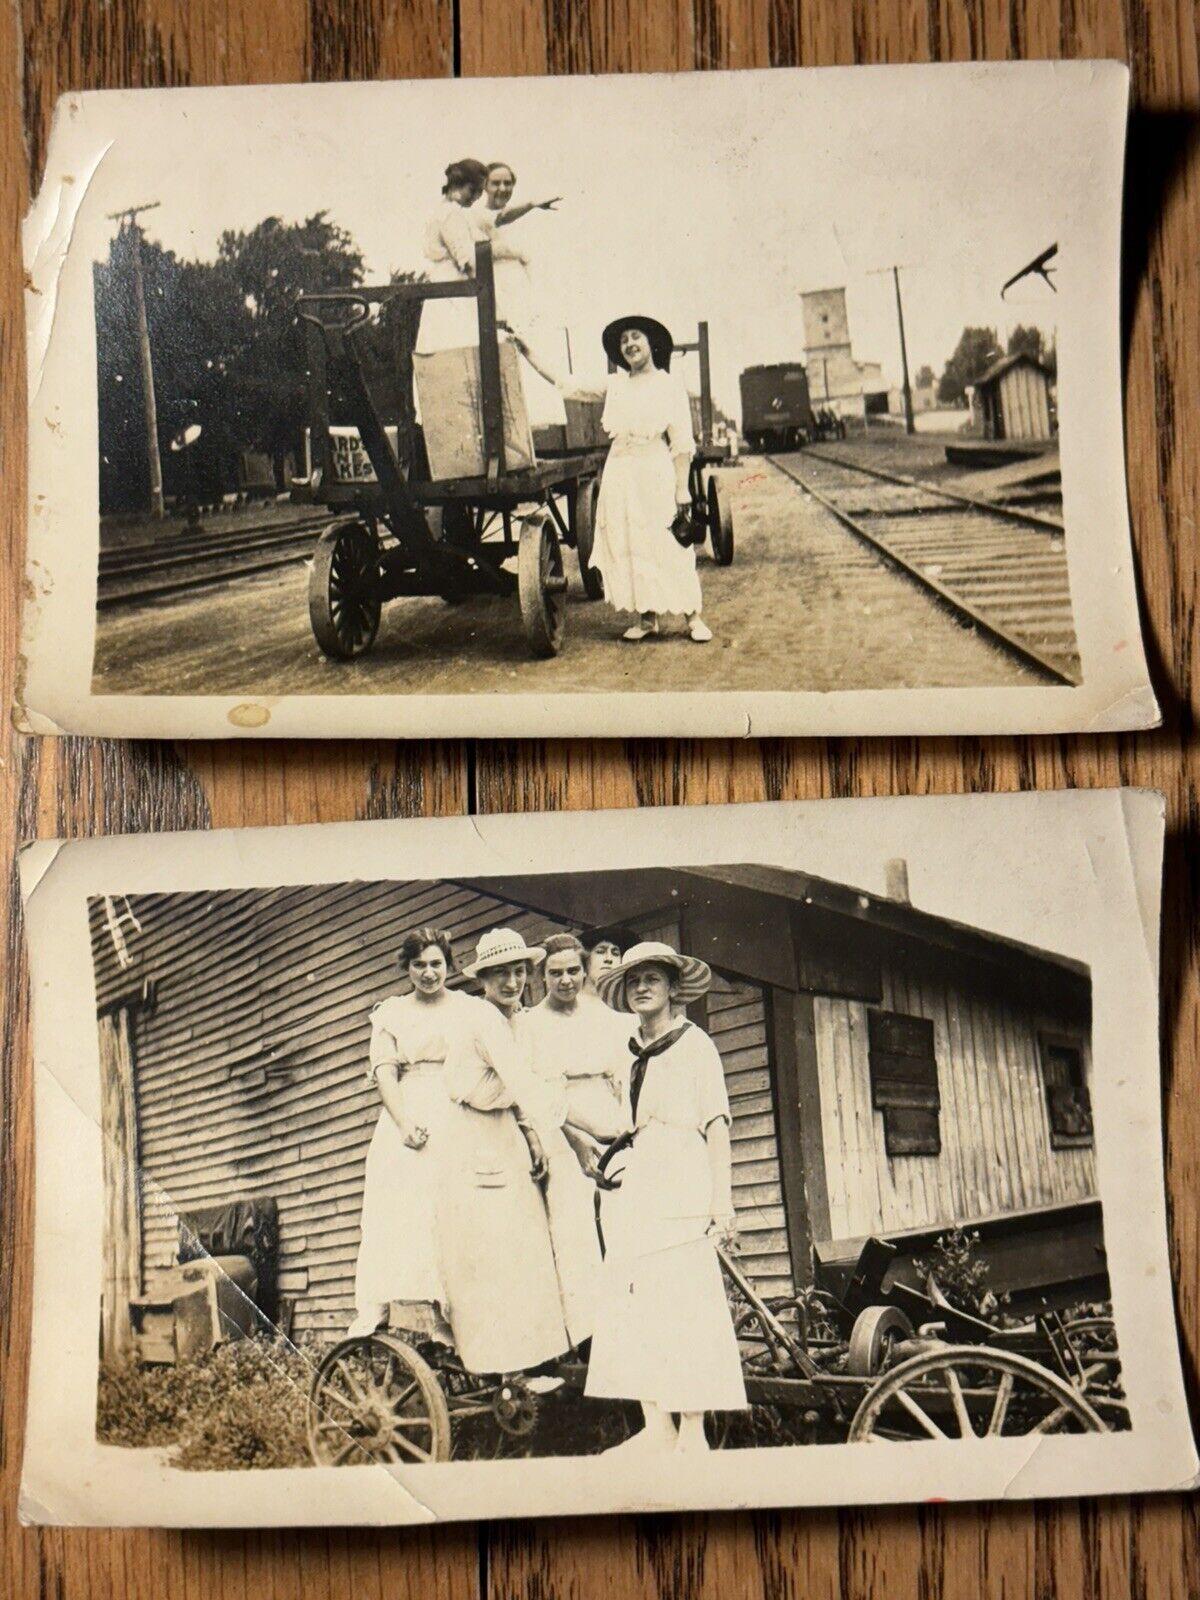 2 Early 1900s Photograph Automobile Homemade Car Bicycle Girls Train Tracks Town